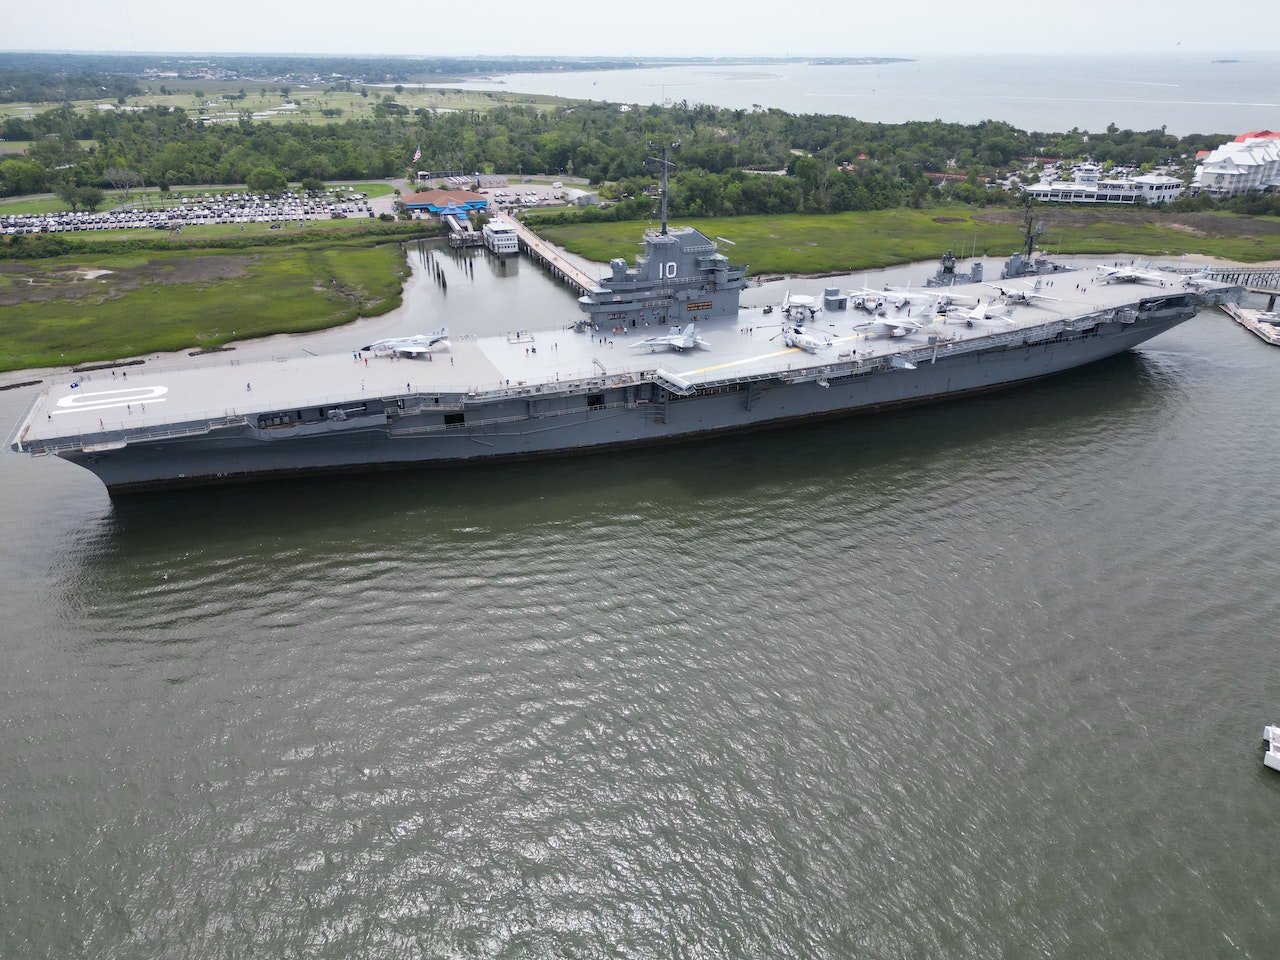 Drone Shots of USS Yorktown Aircraft Carrier in the Harbor | Veteran Car Donations